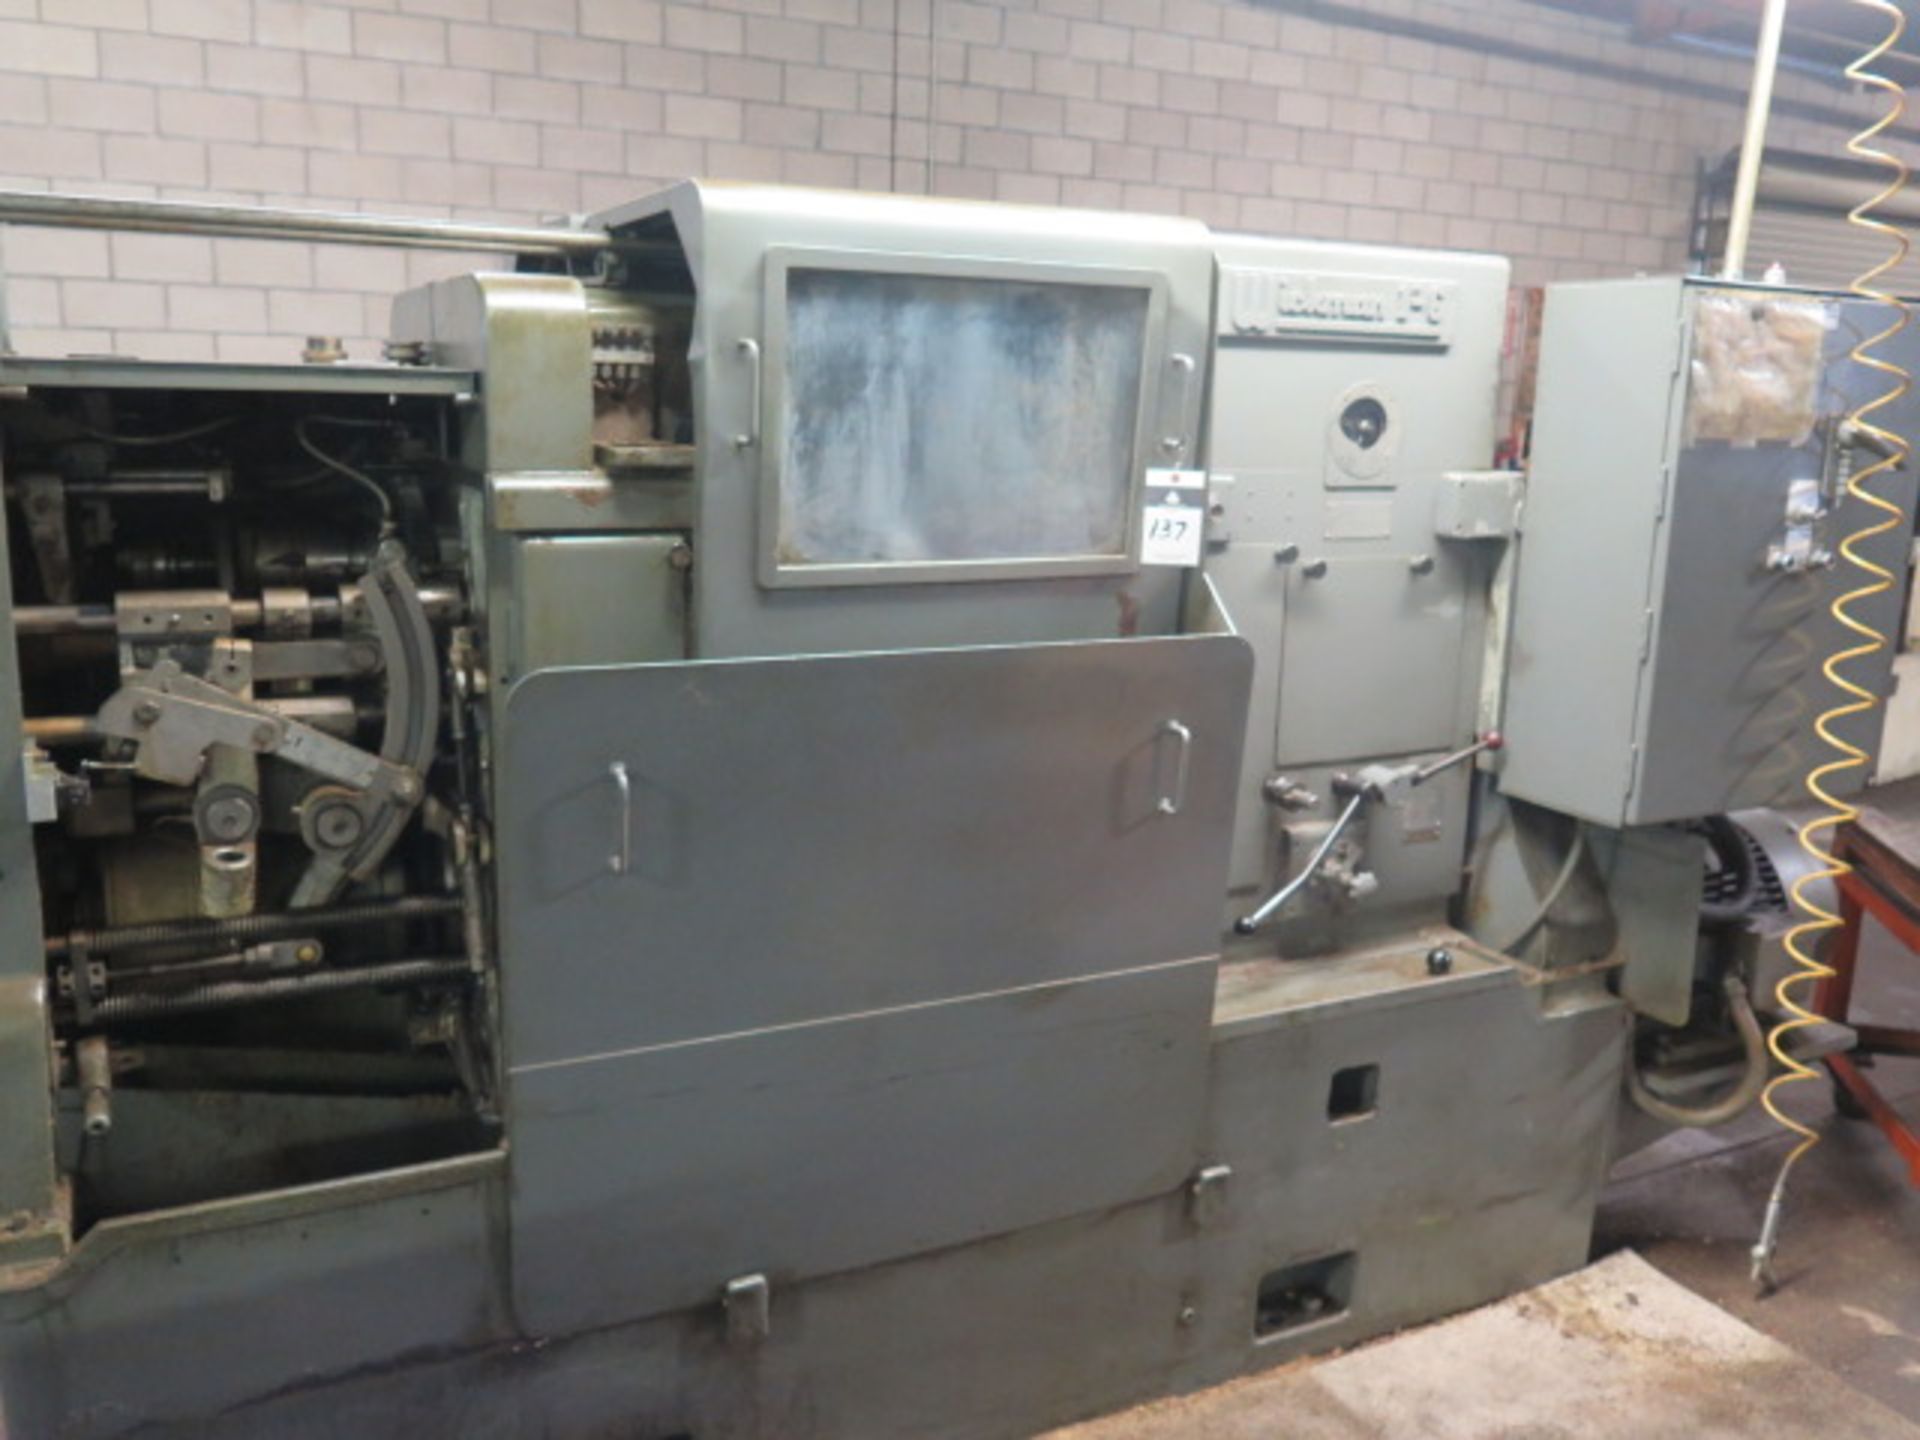 Wickman “1-6” 1” 6-Spindle Automatic Screw Machine s/n 670004 w/ Chip Auger, Coolant, Bar Feed - Image 2 of 10